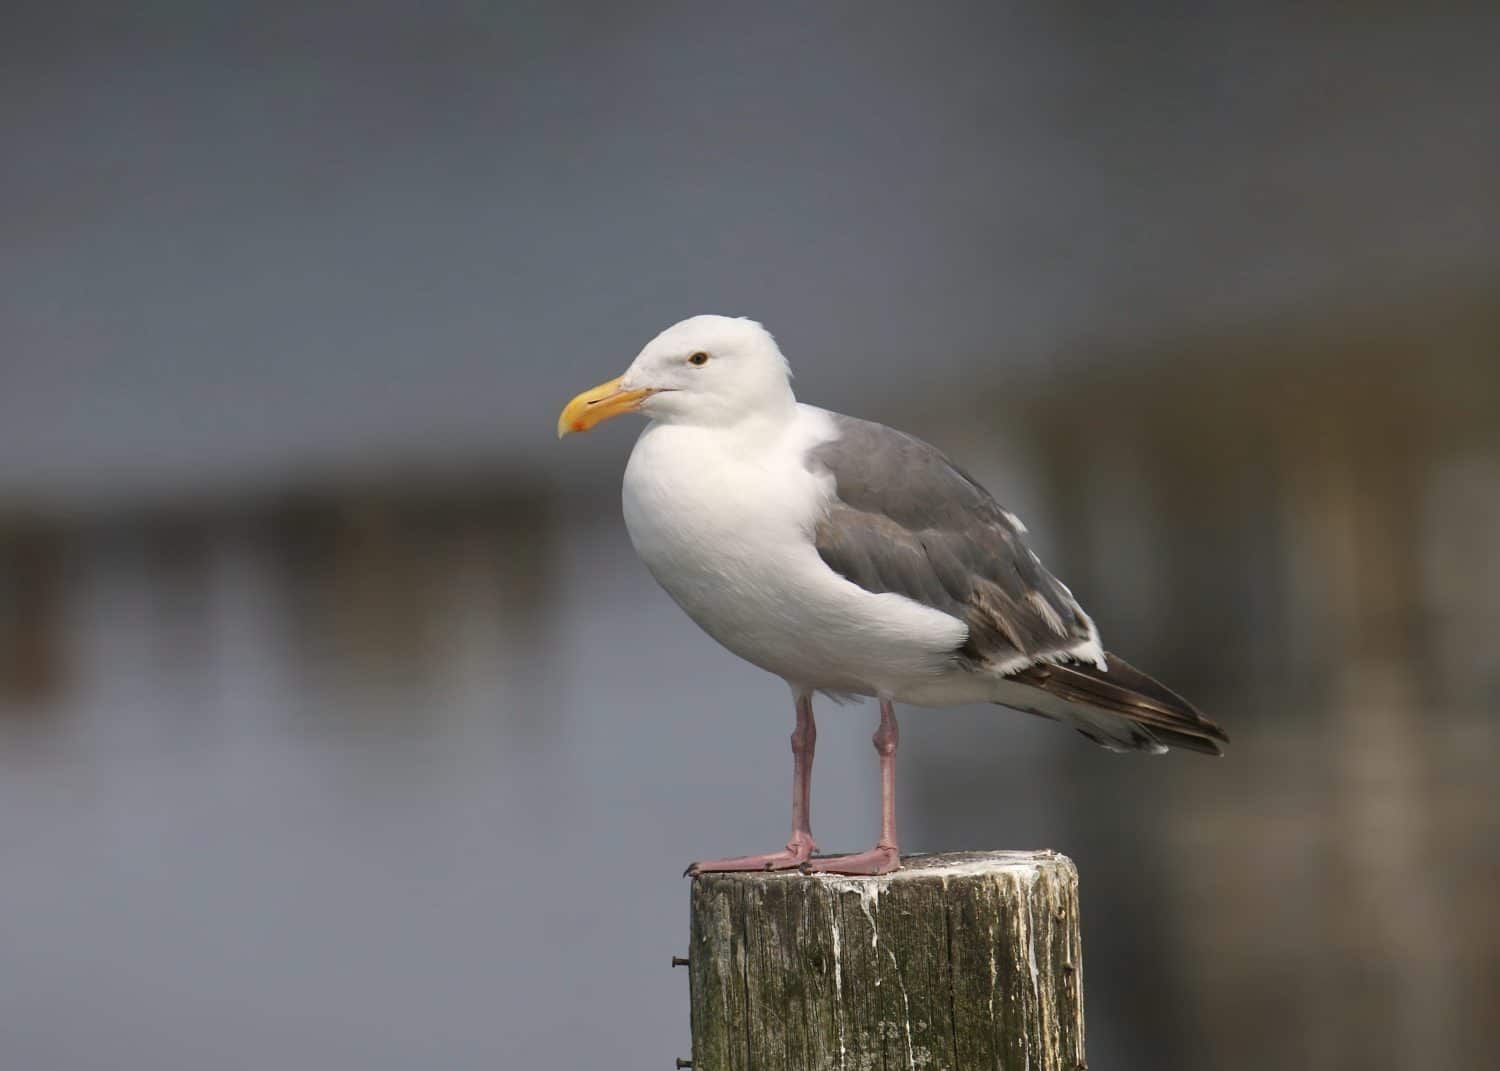 Western Gull (larus occidentalis) perched on a wooden post